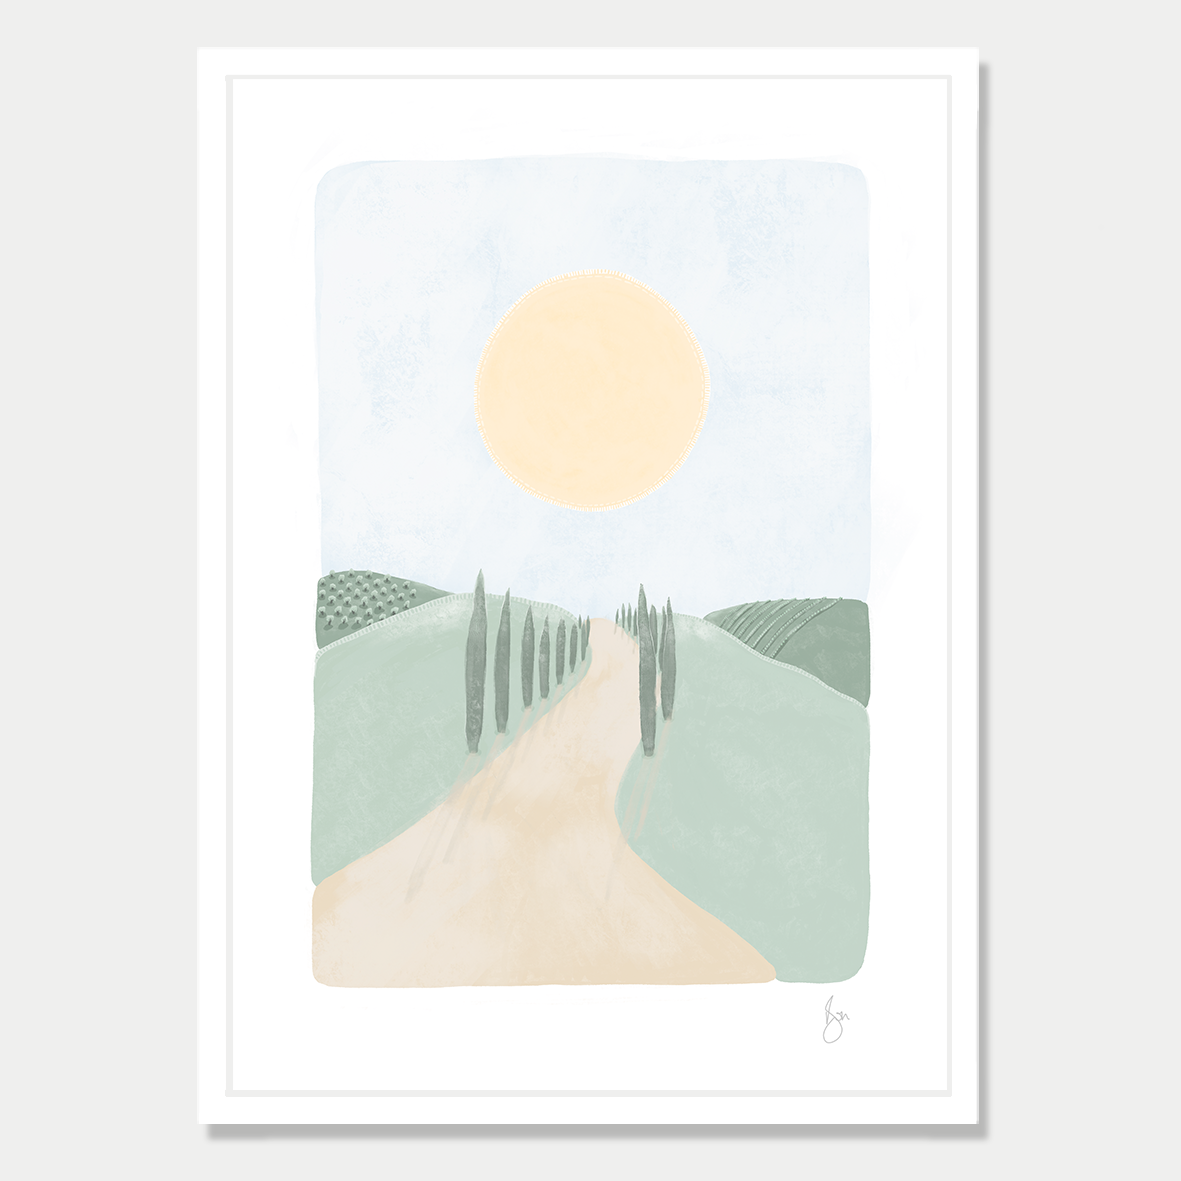 Art print of the Tuscan countryside with a large sun, by Bon Jung. Printed in New Zealand by endemicworld and framed in white.